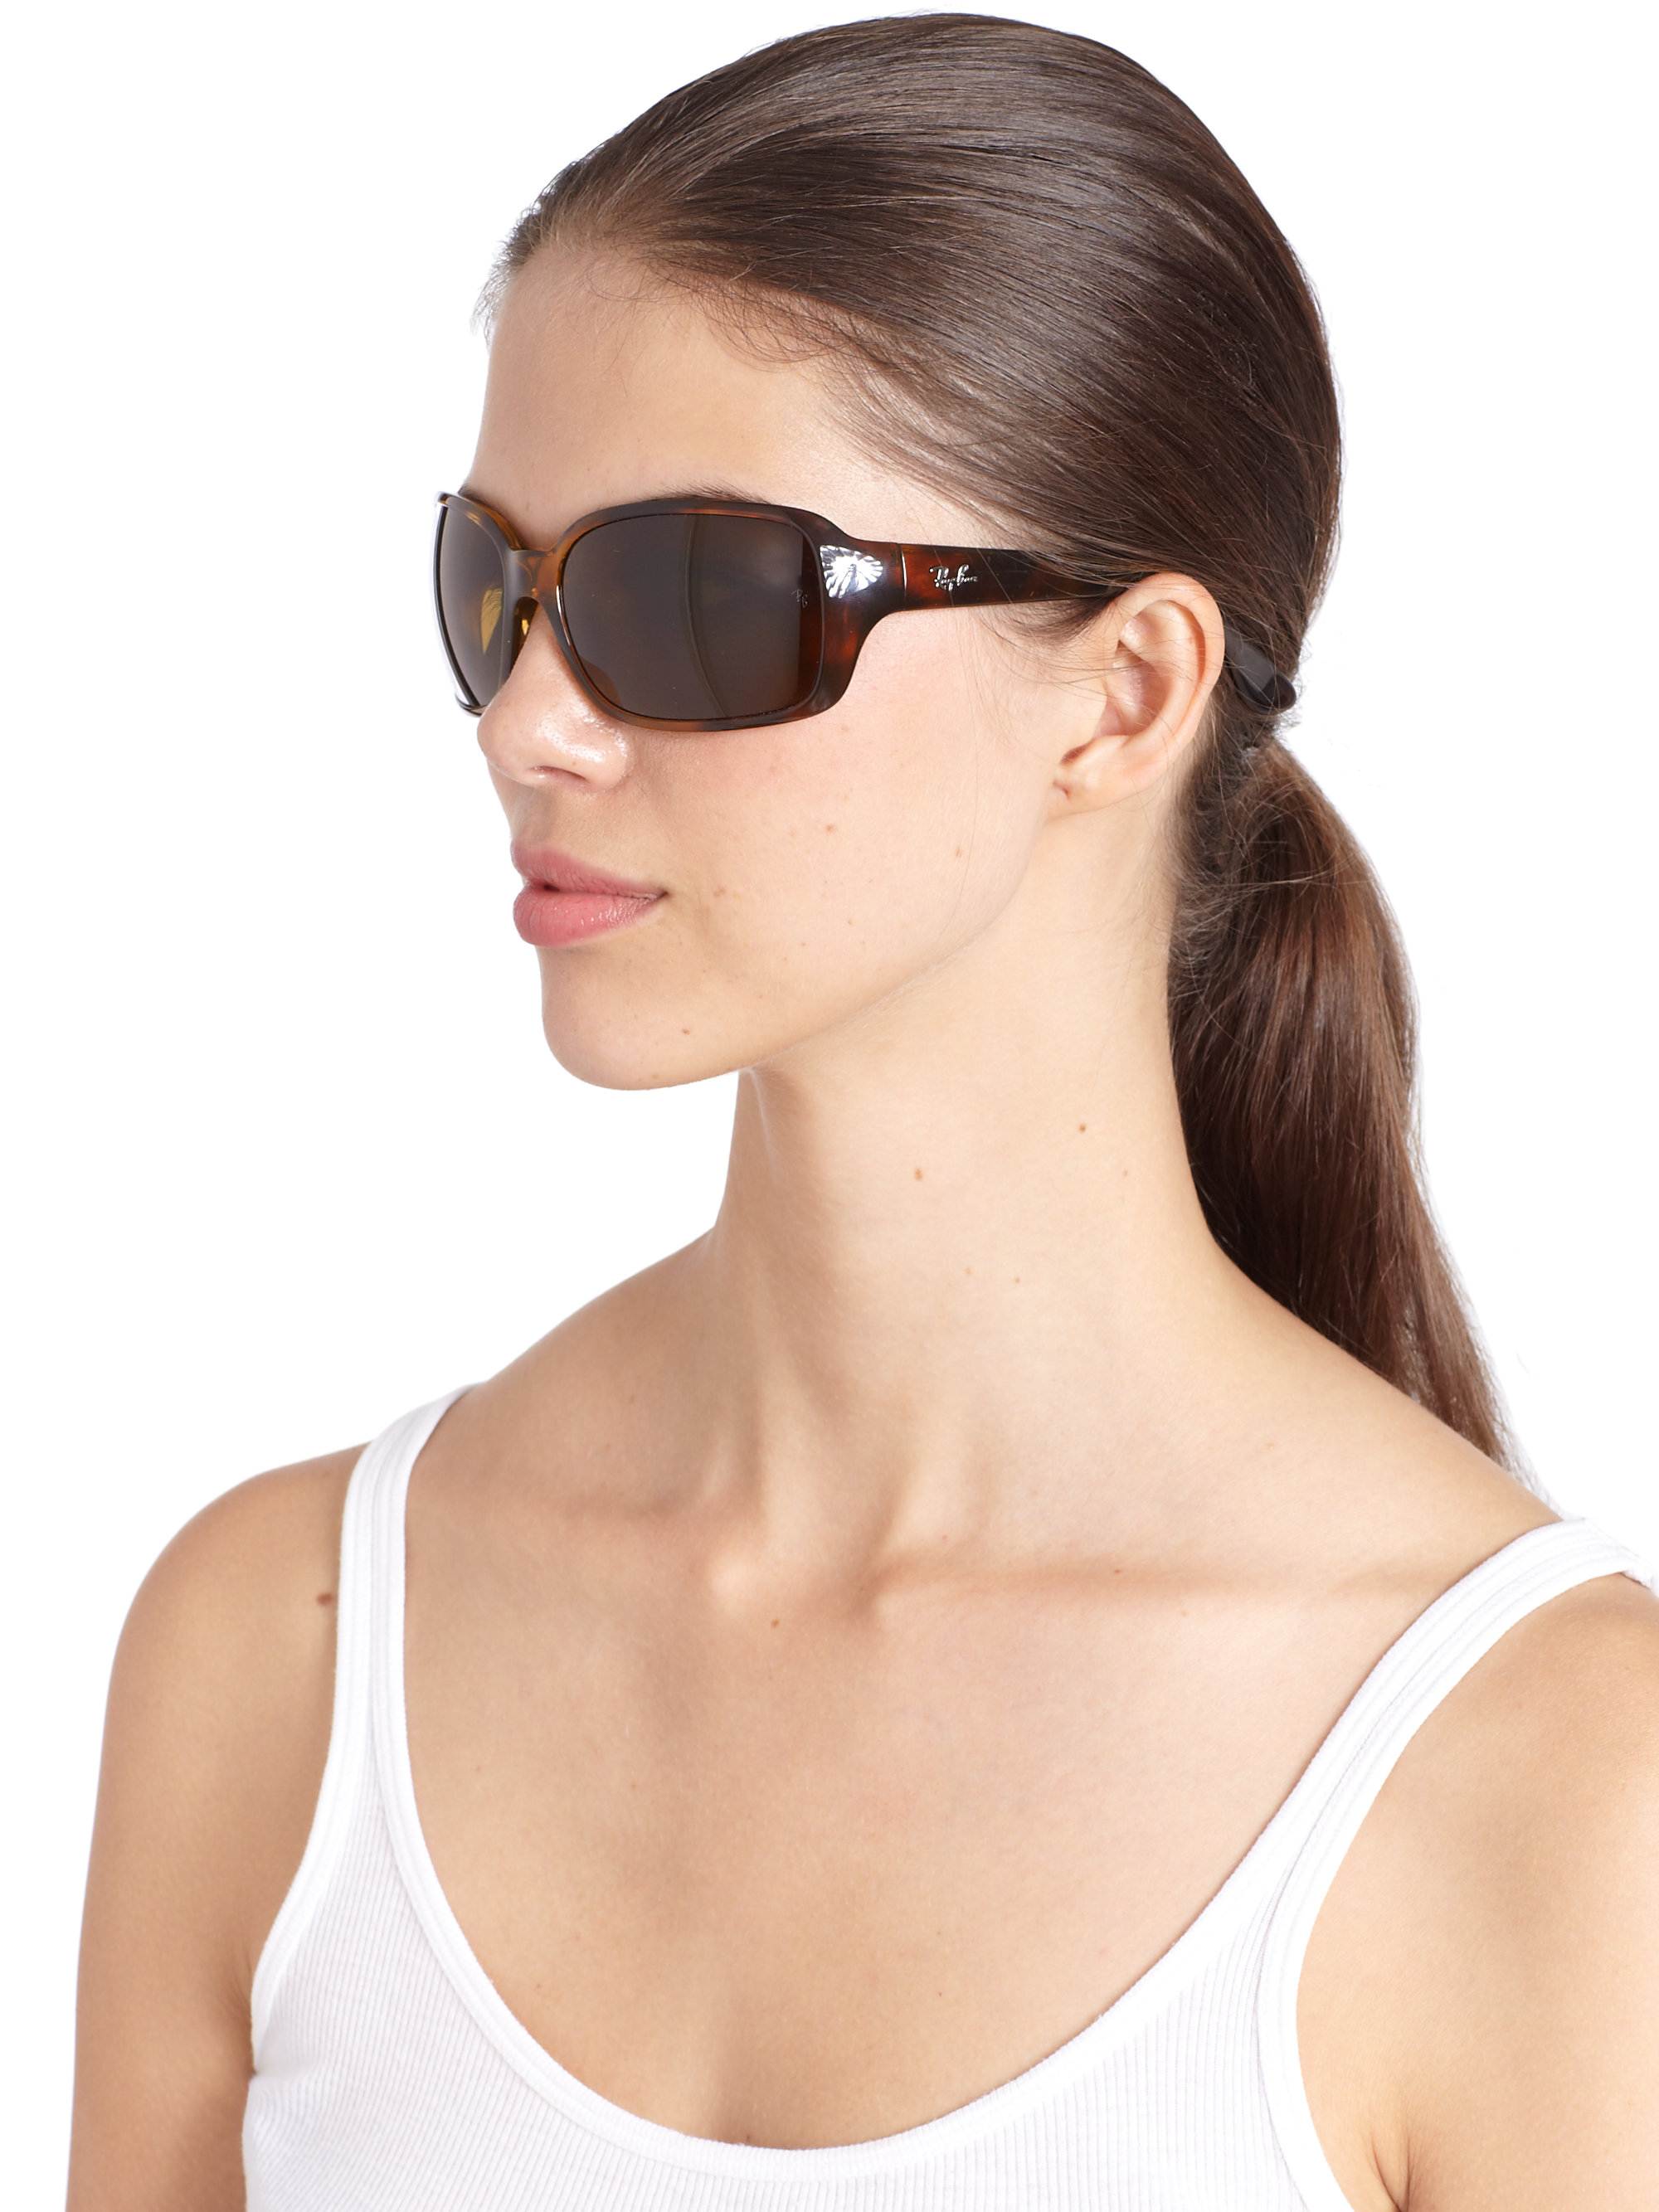 Ray Ban Wrap Around Sunglasses Online Offers, Save 48% 